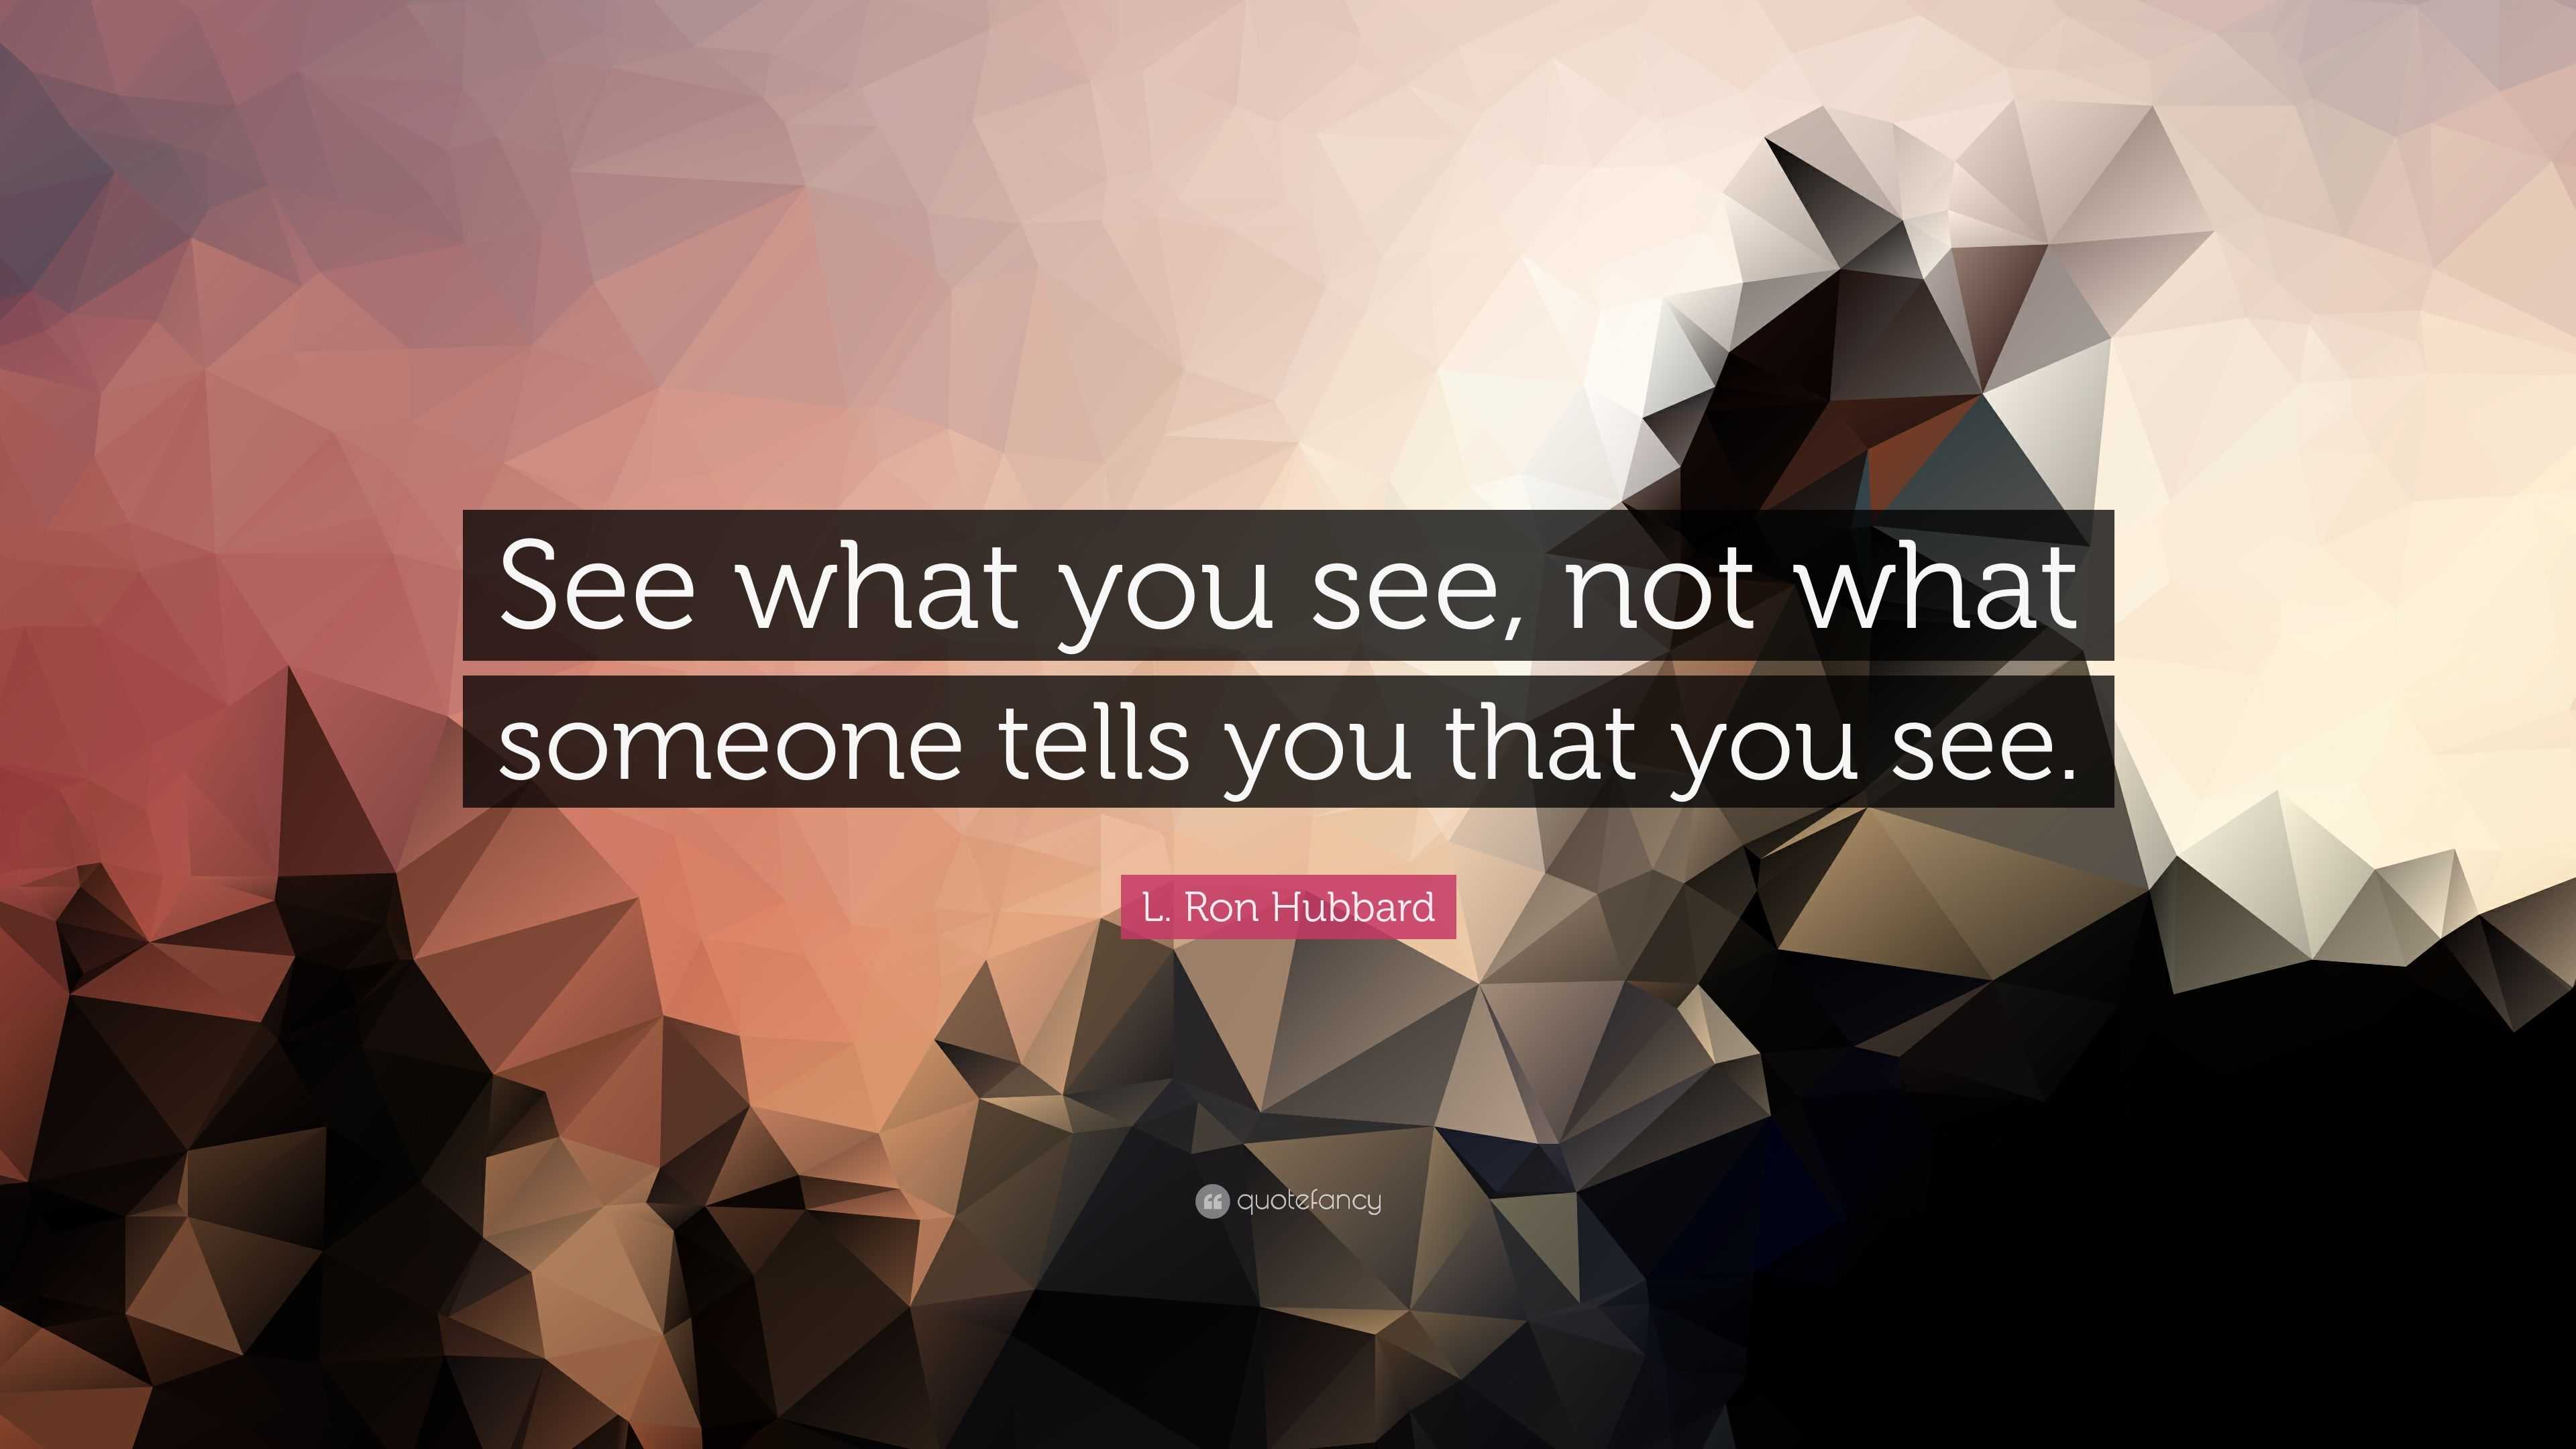 L. Ron Hubbard Quote: “See what you see, not what someone tells you ...